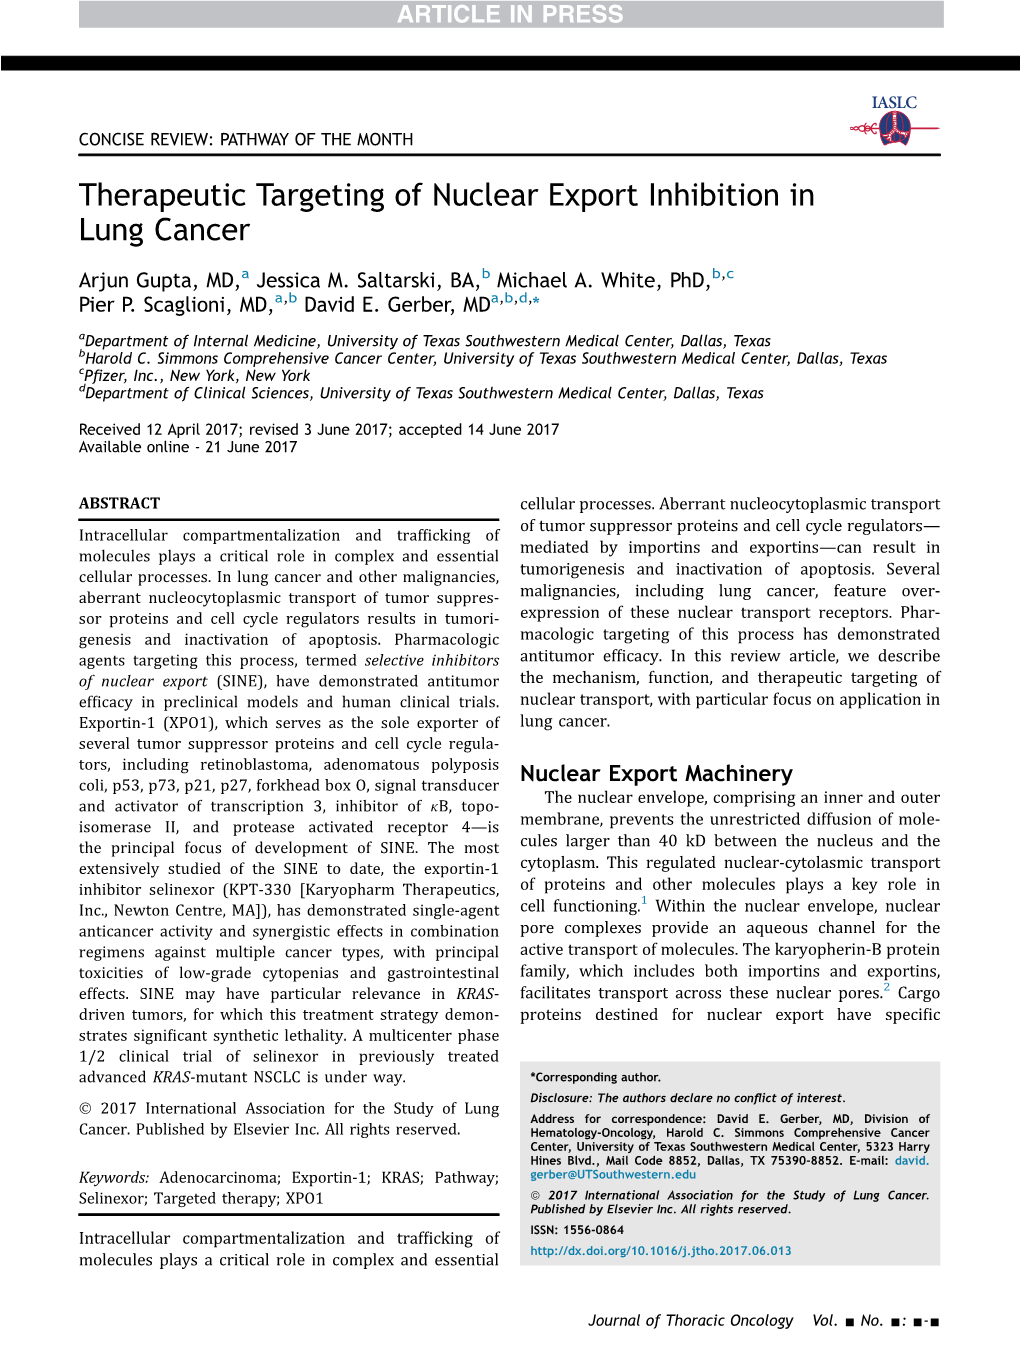 Therapeutic Targeting of Nuclear Export Inhibition in Lung Cancer